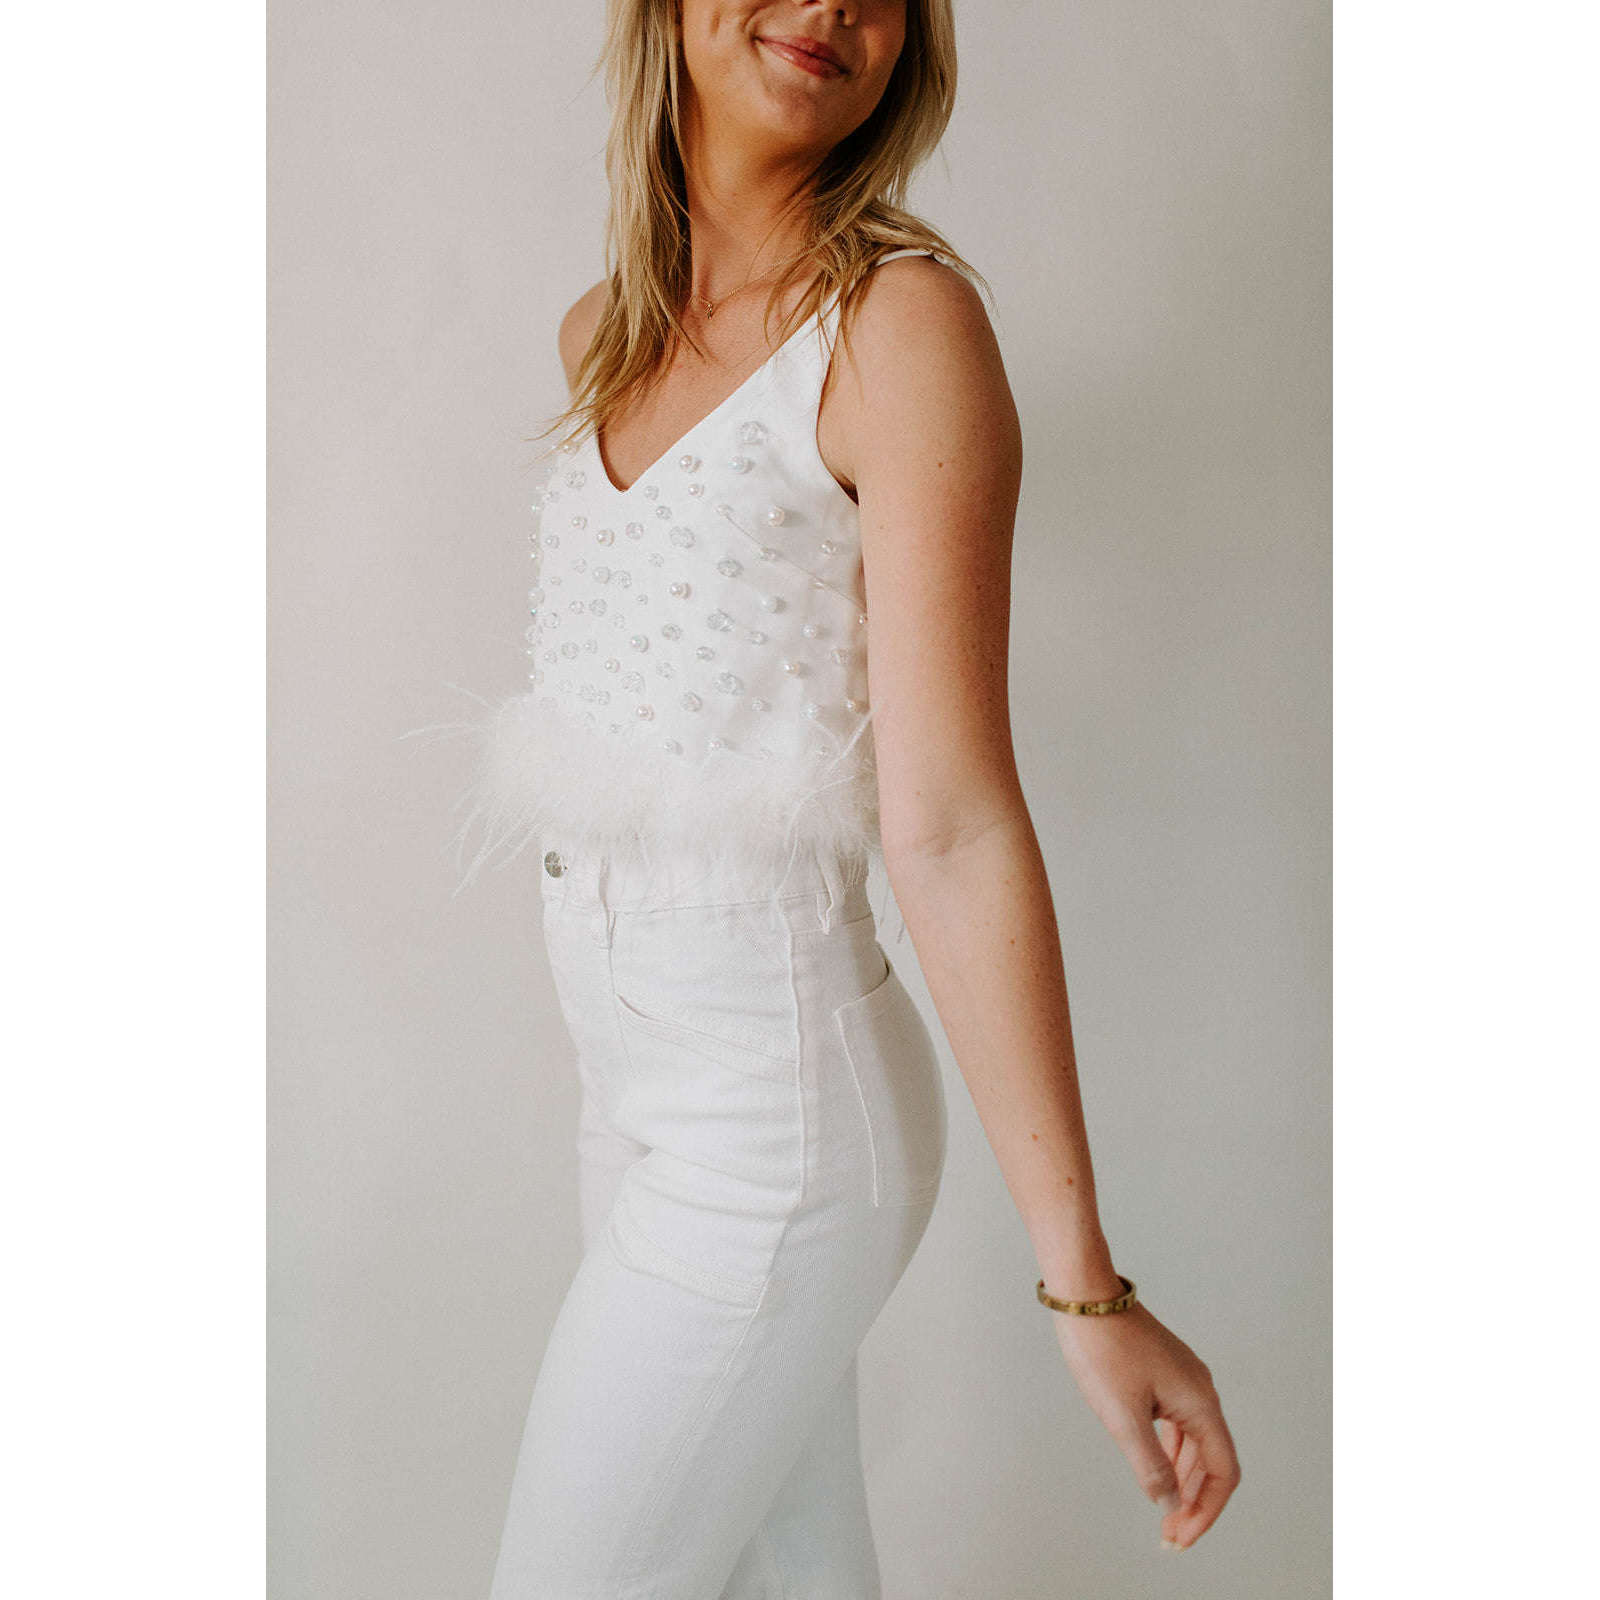 8.28 Boutique:Buddy Love,Buddy Love Seraphina White Top,Tops